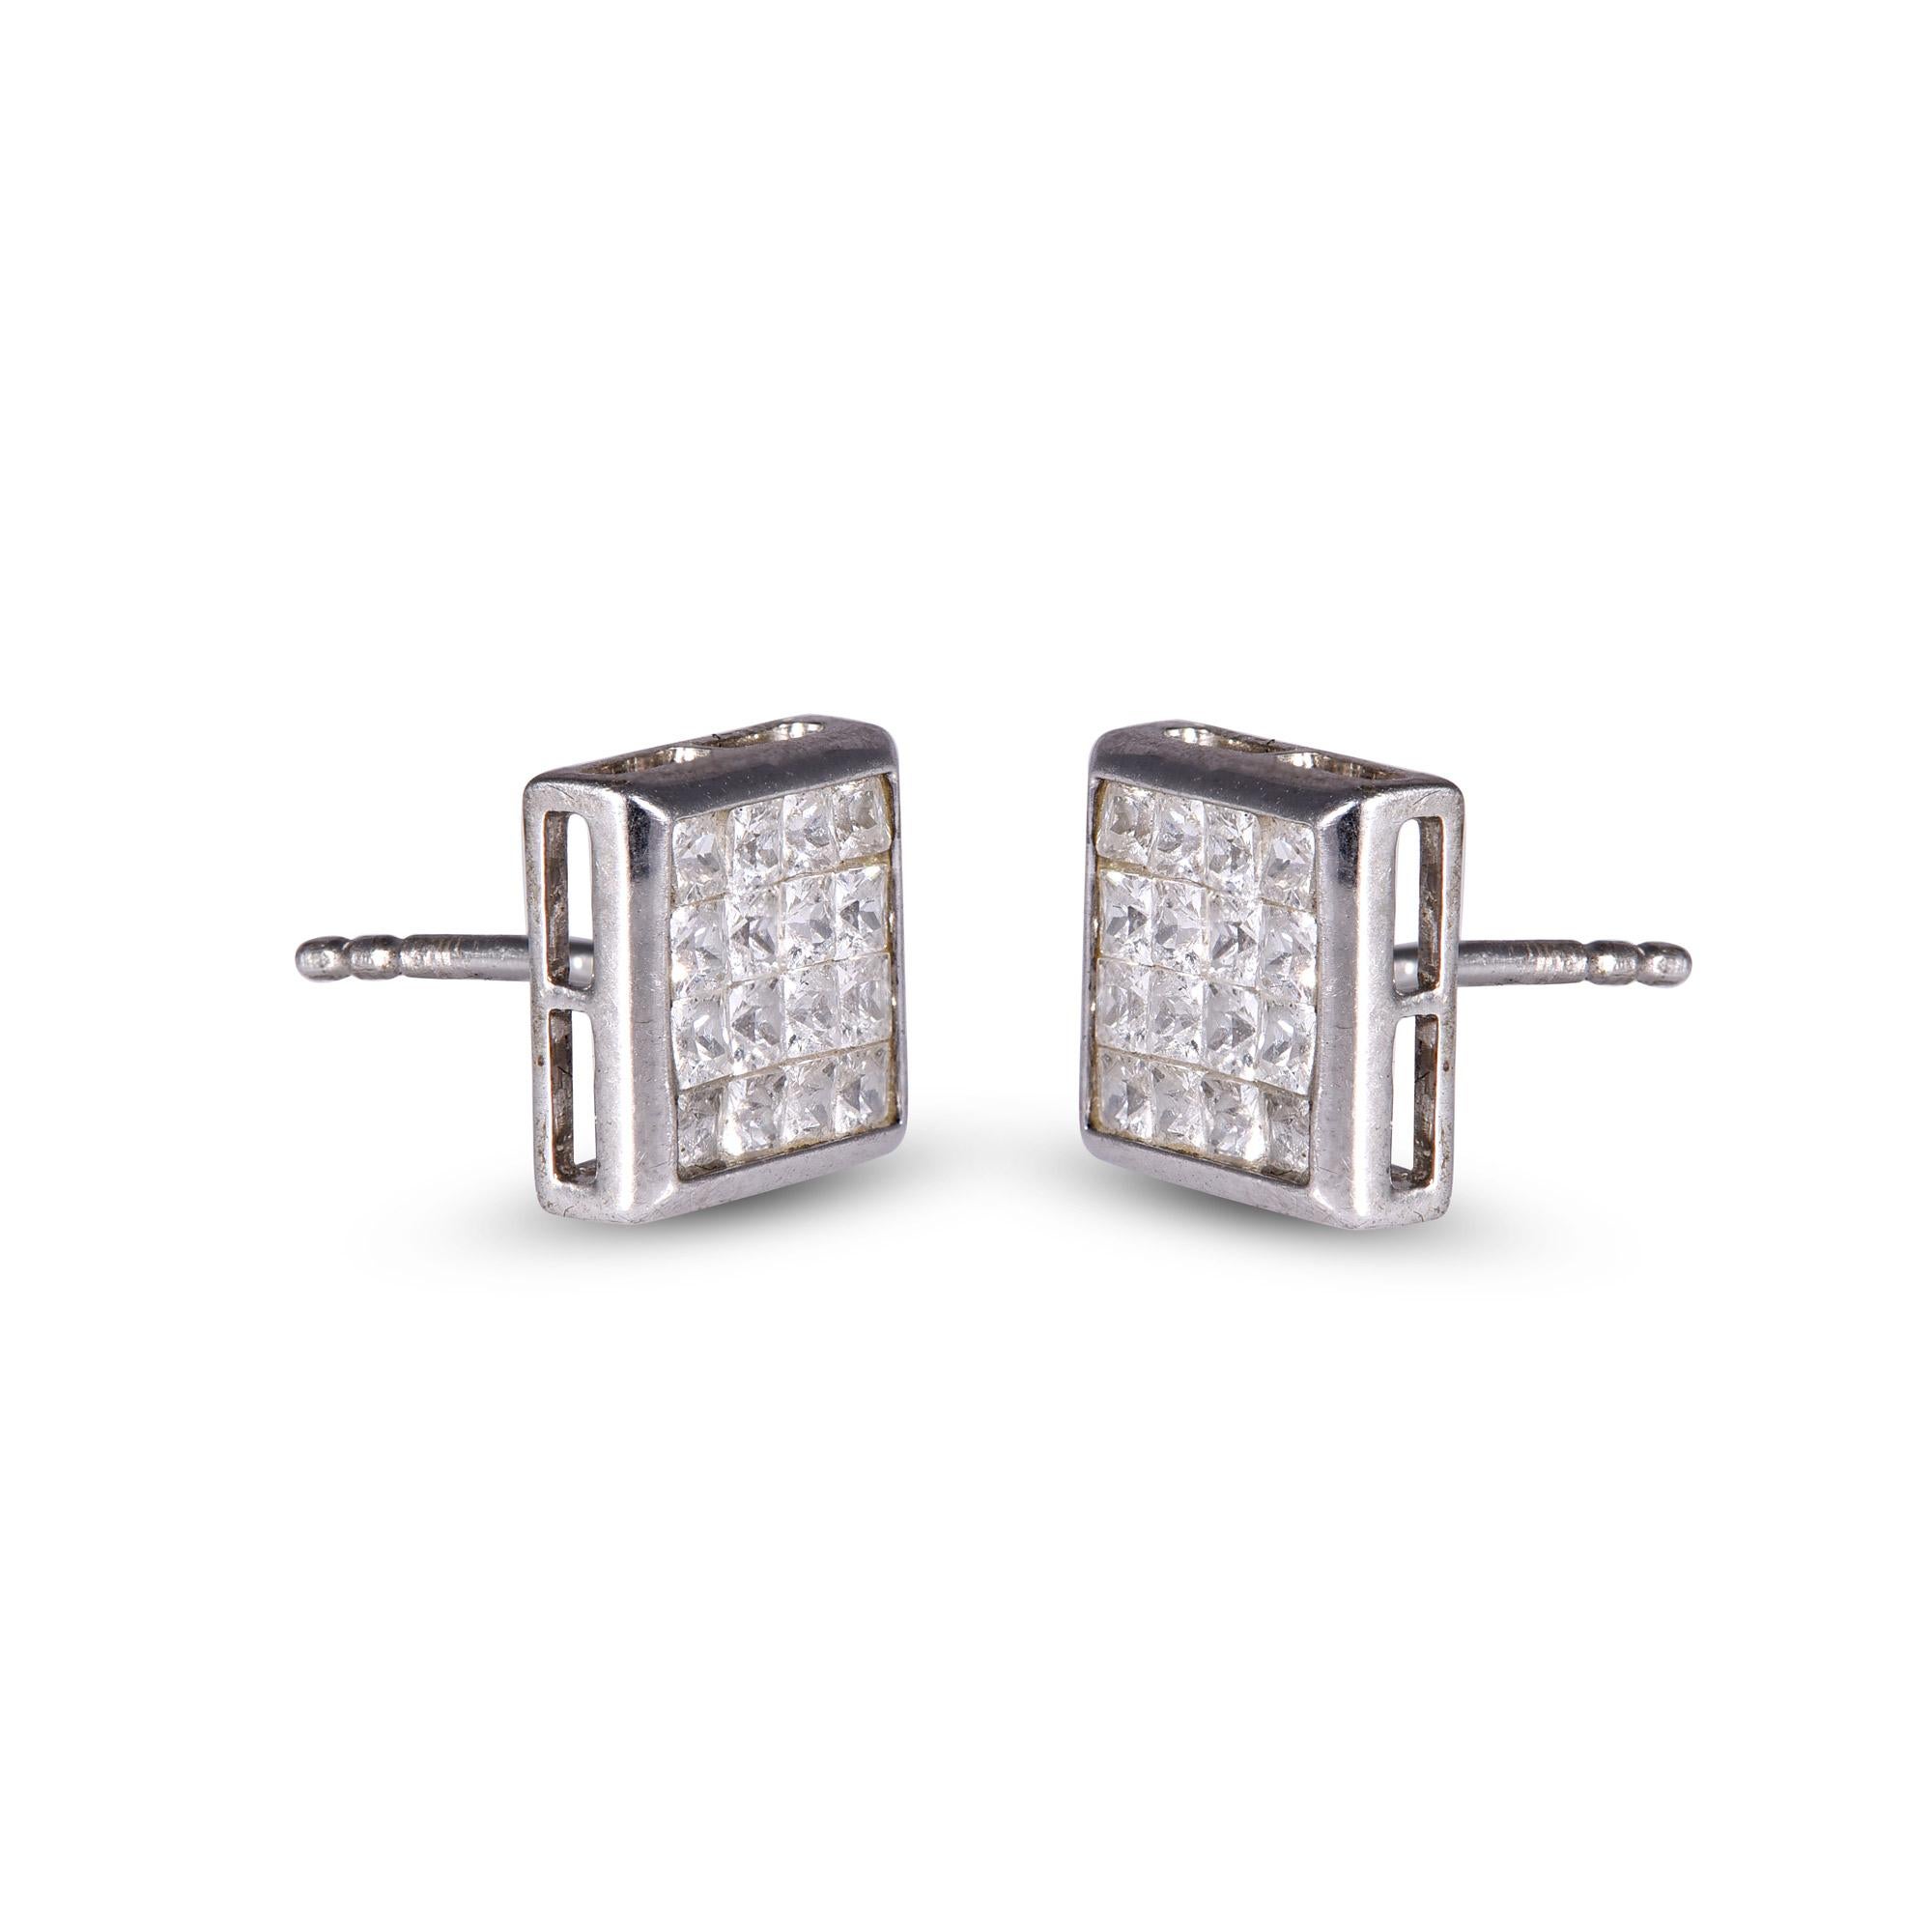 Round Cut TJD 1.00 Carat Princess Cut Diamond 18K White Gold Invisible Set Stud Earrings For Sale